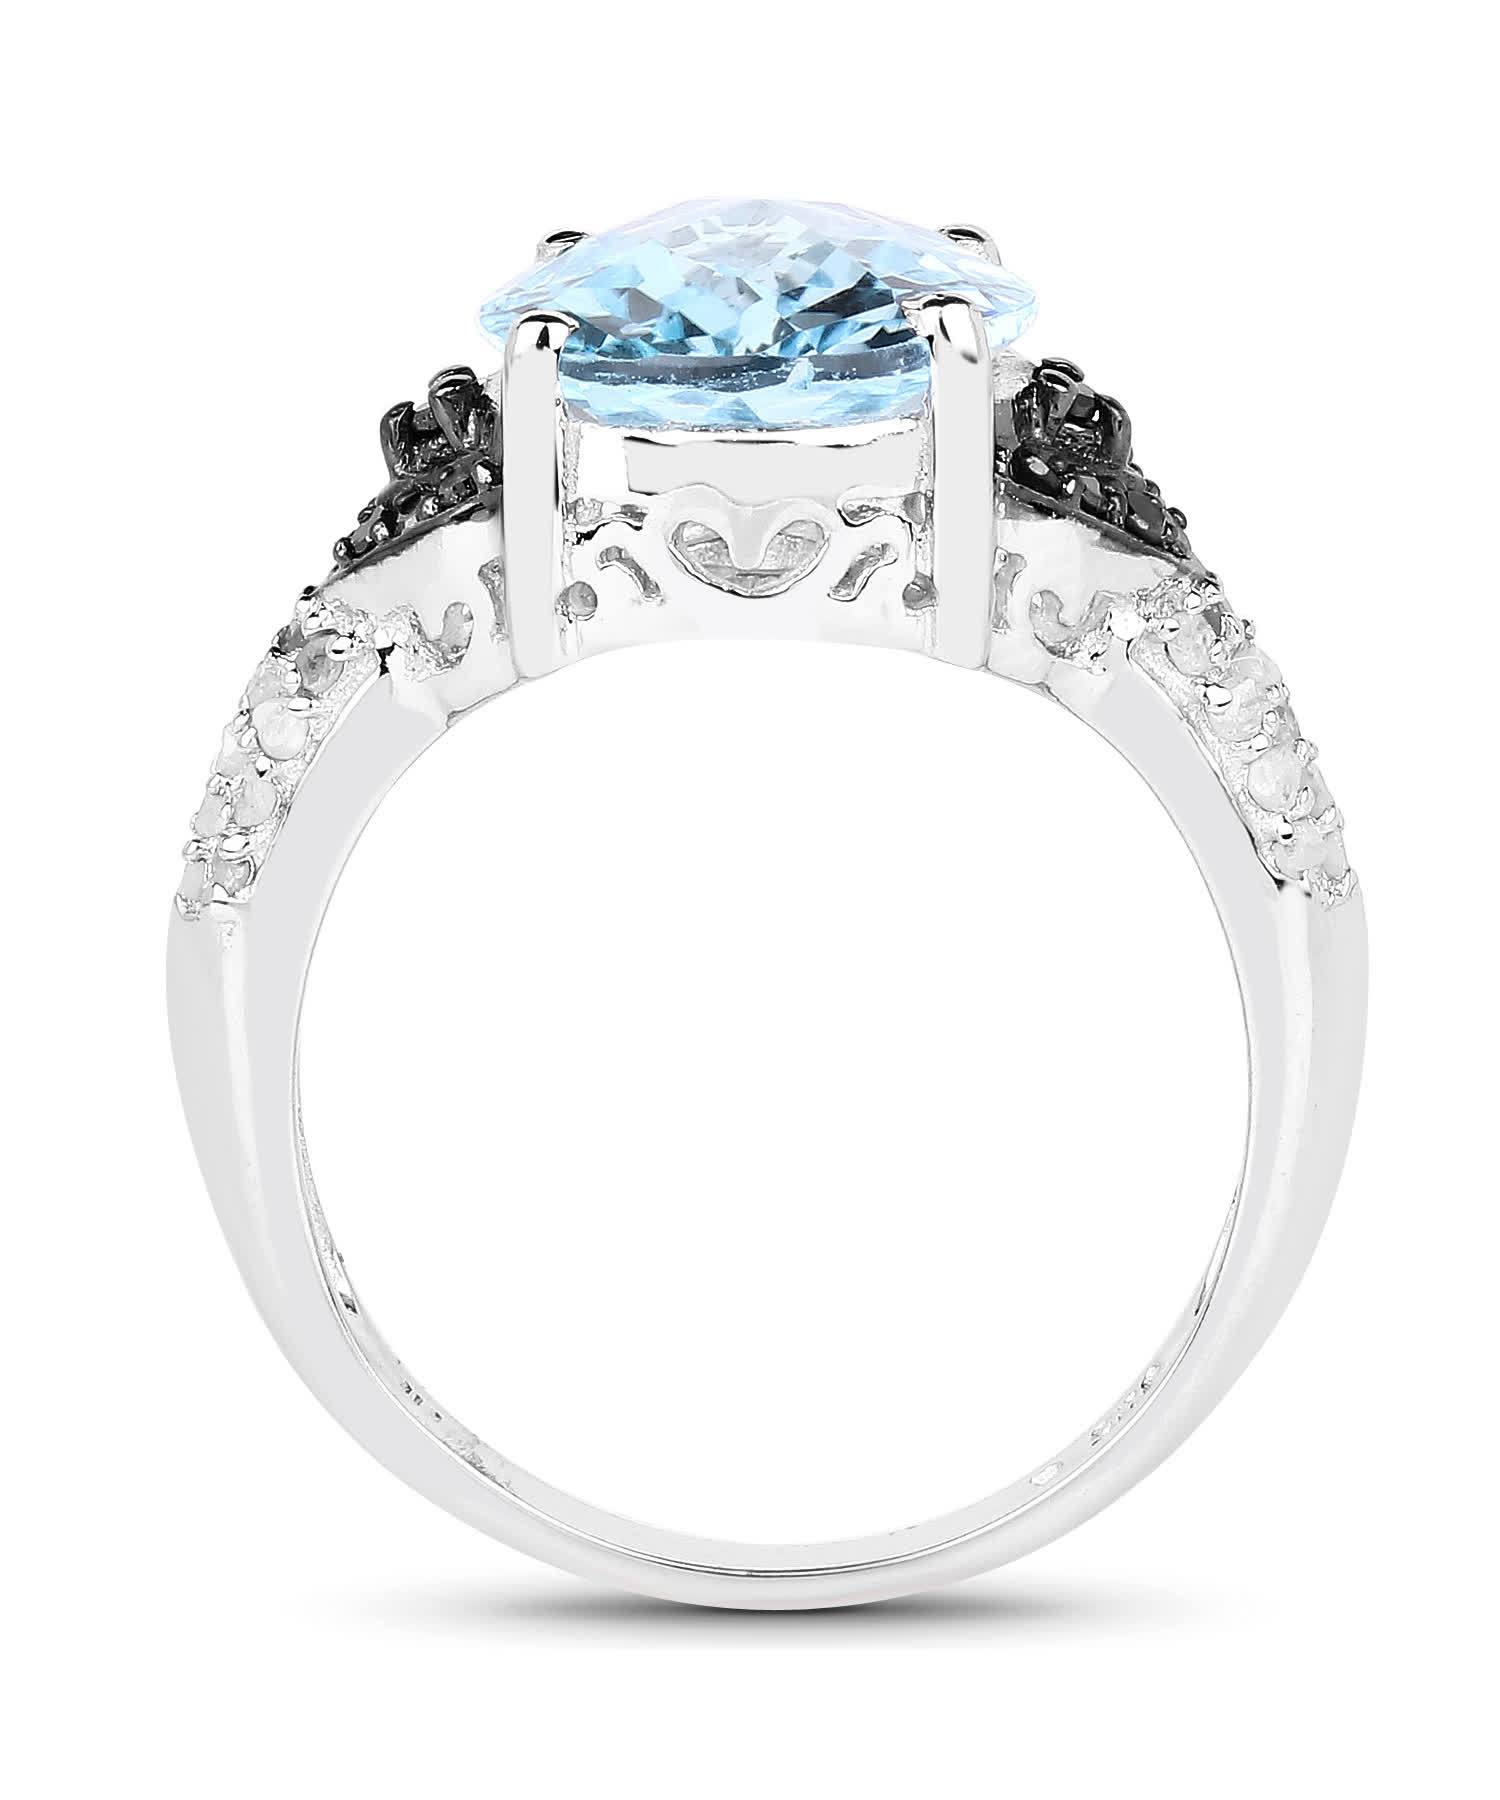 5.37ctw Natural Swiss Blue Topaz and Black Diamond Rhodium Plated 925 Sterling Silver Cocktail Ring View 2